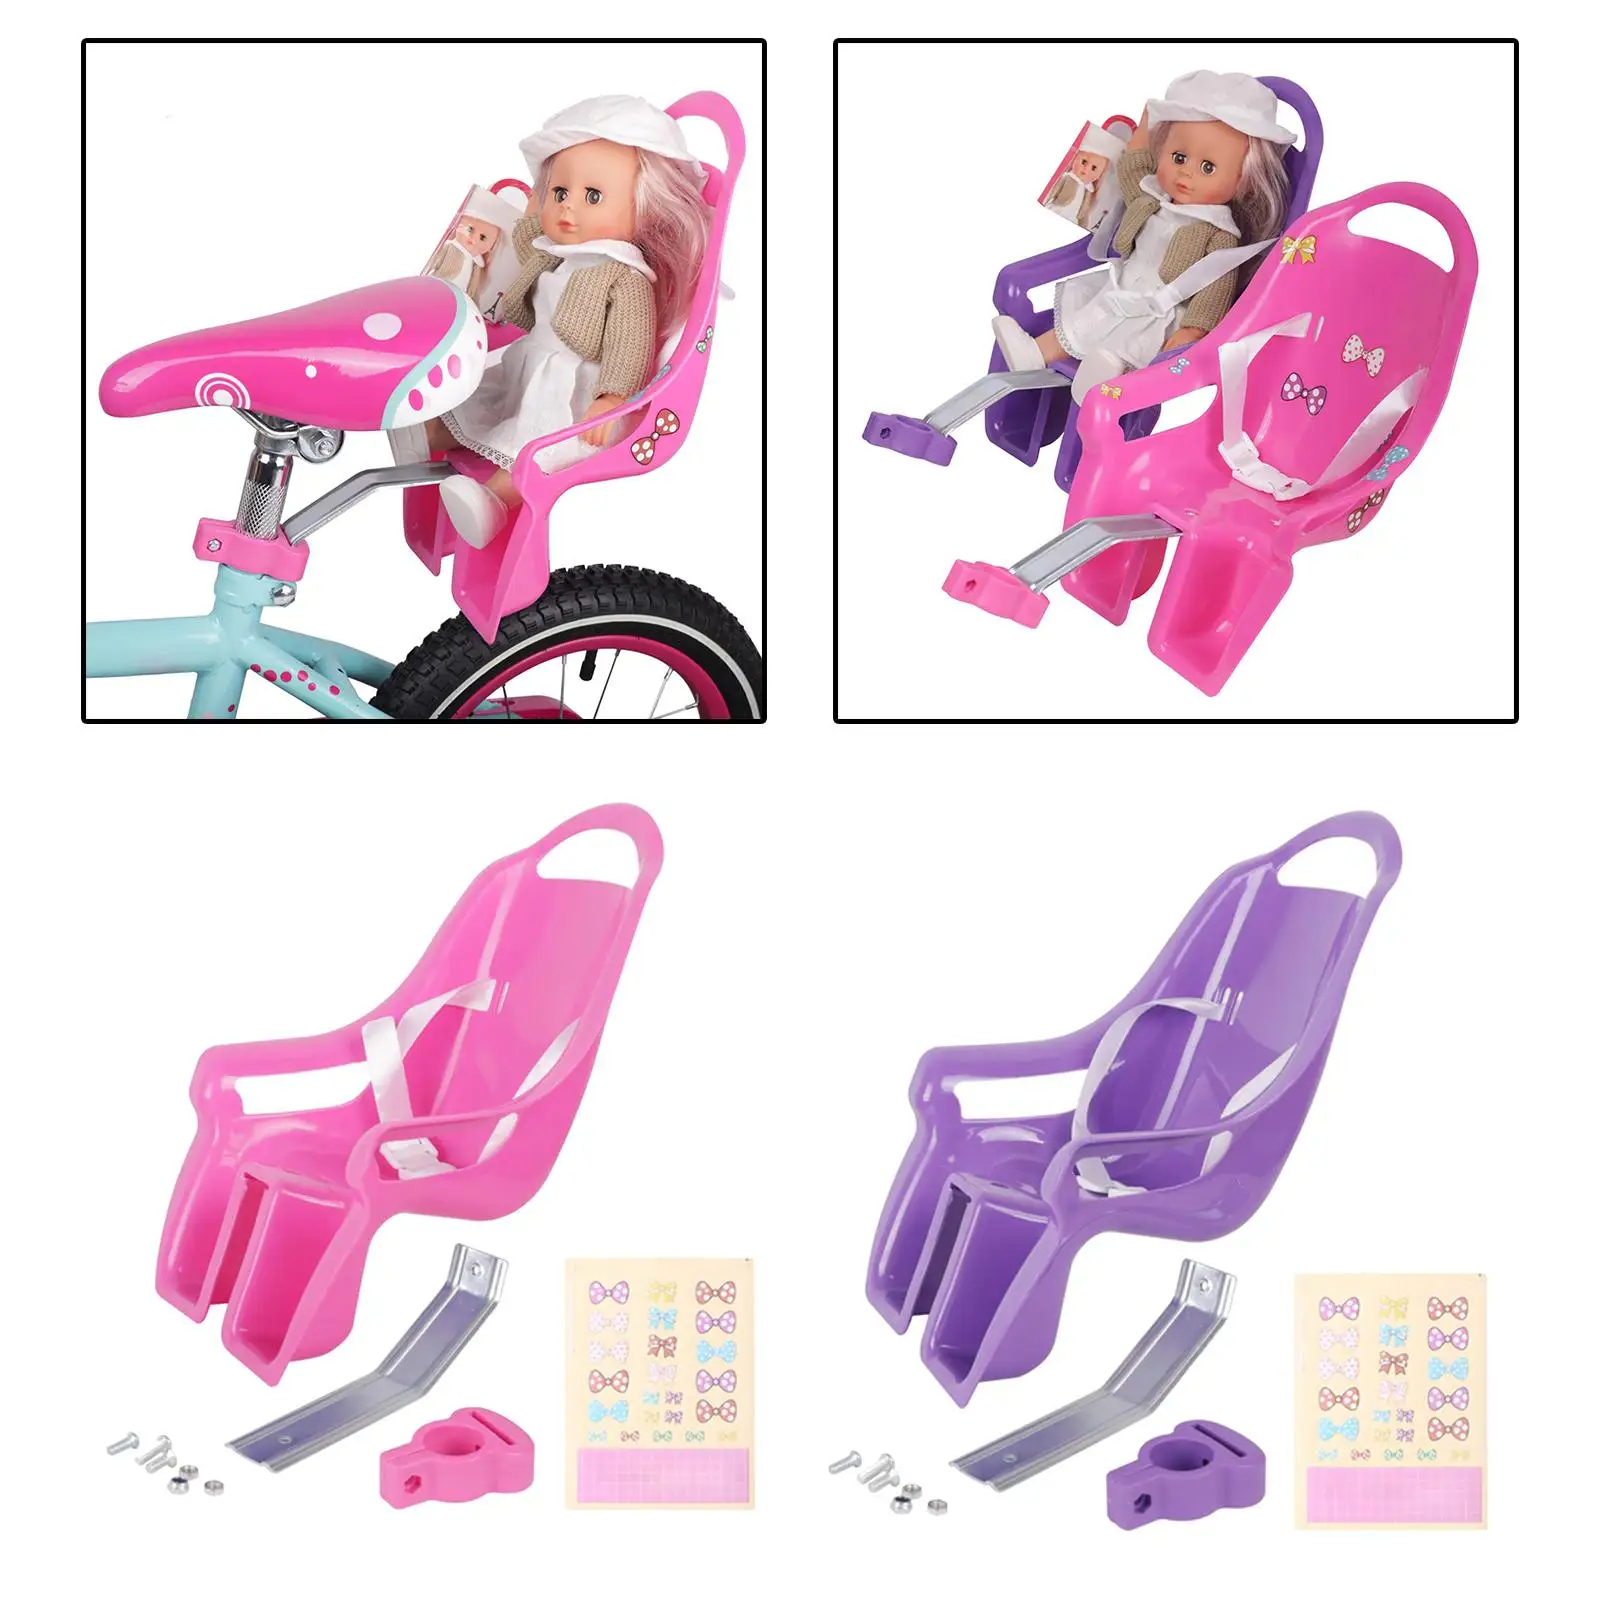 Girls Bike Doll Seat Children Gifts with DIY Decals Kids Bike Decoration Bicycle Accessories for Girls Kids